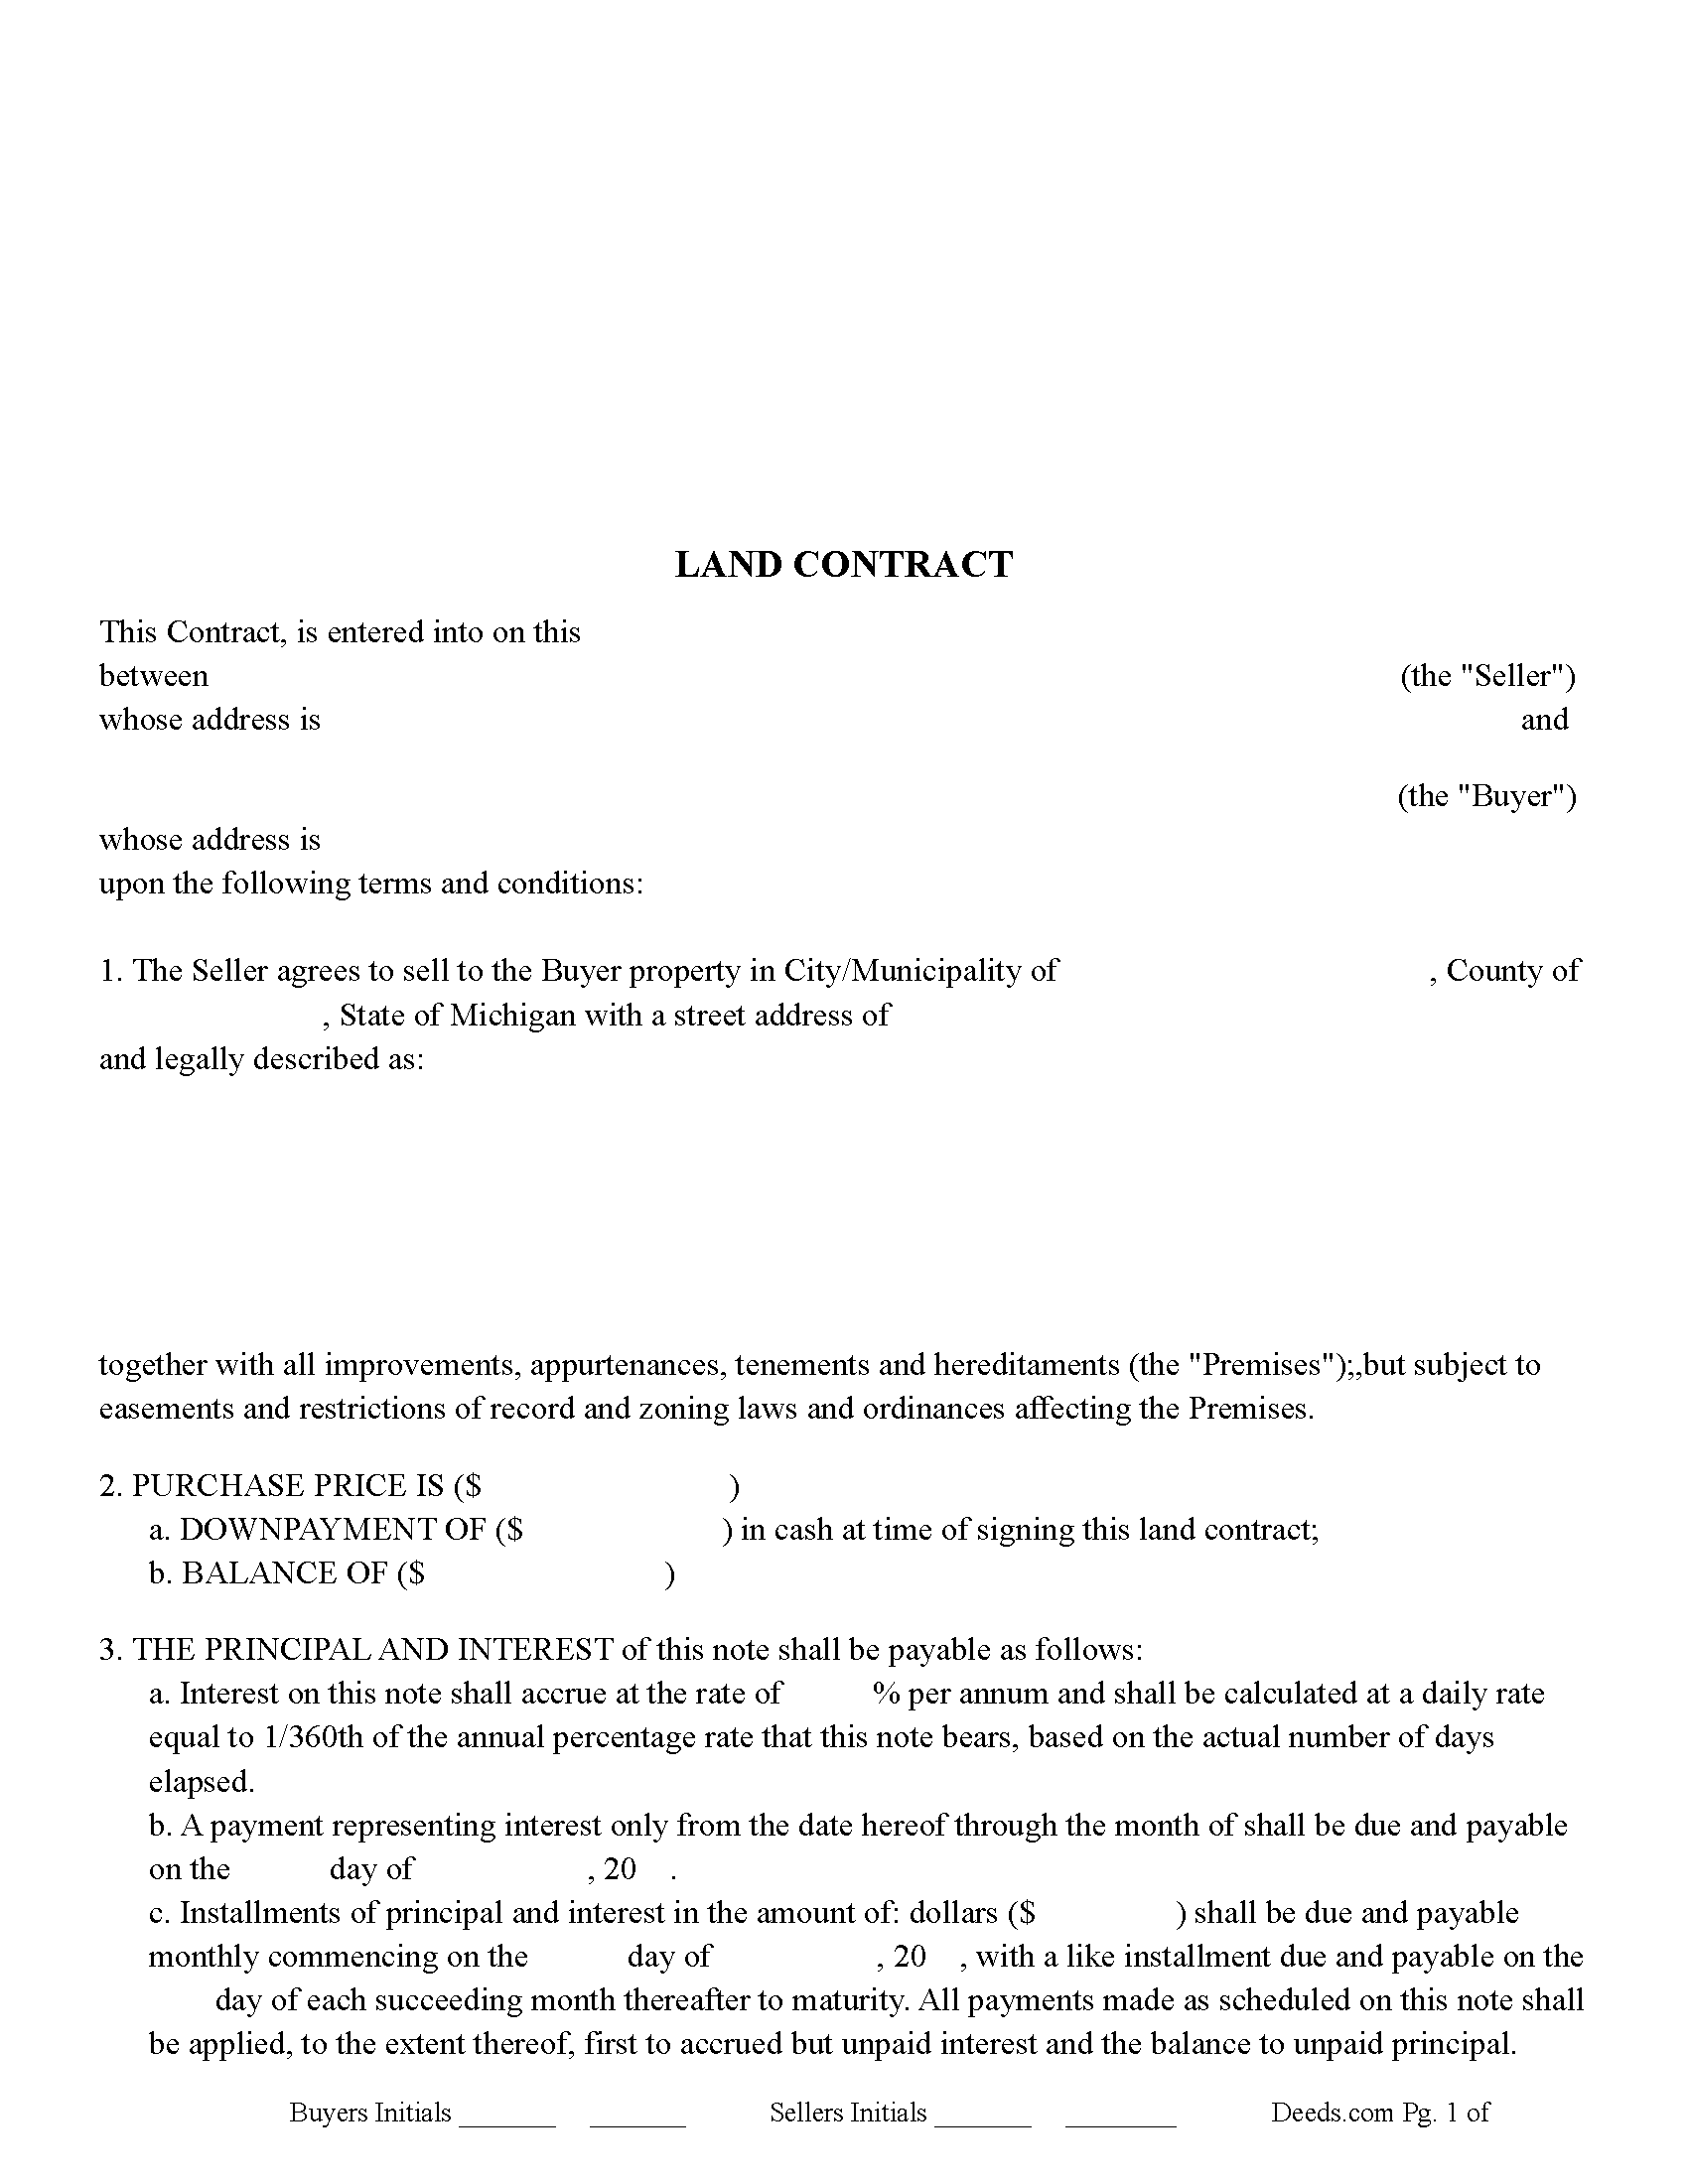 Berrien County Land Contract Form